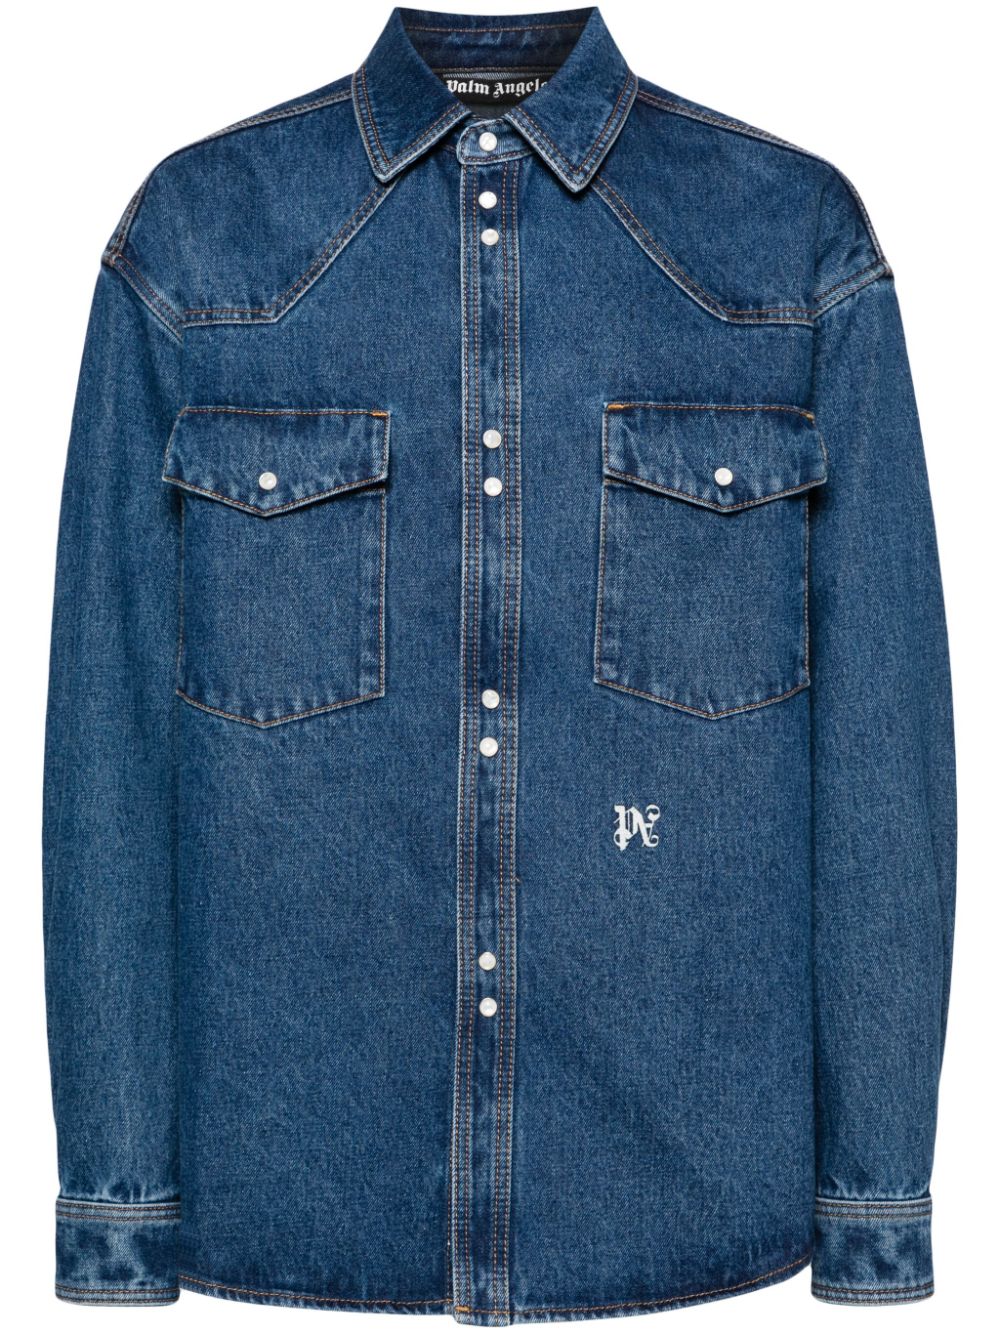 PALM ANGELS Embroidered Denim Shirt for Men in Navy Blue